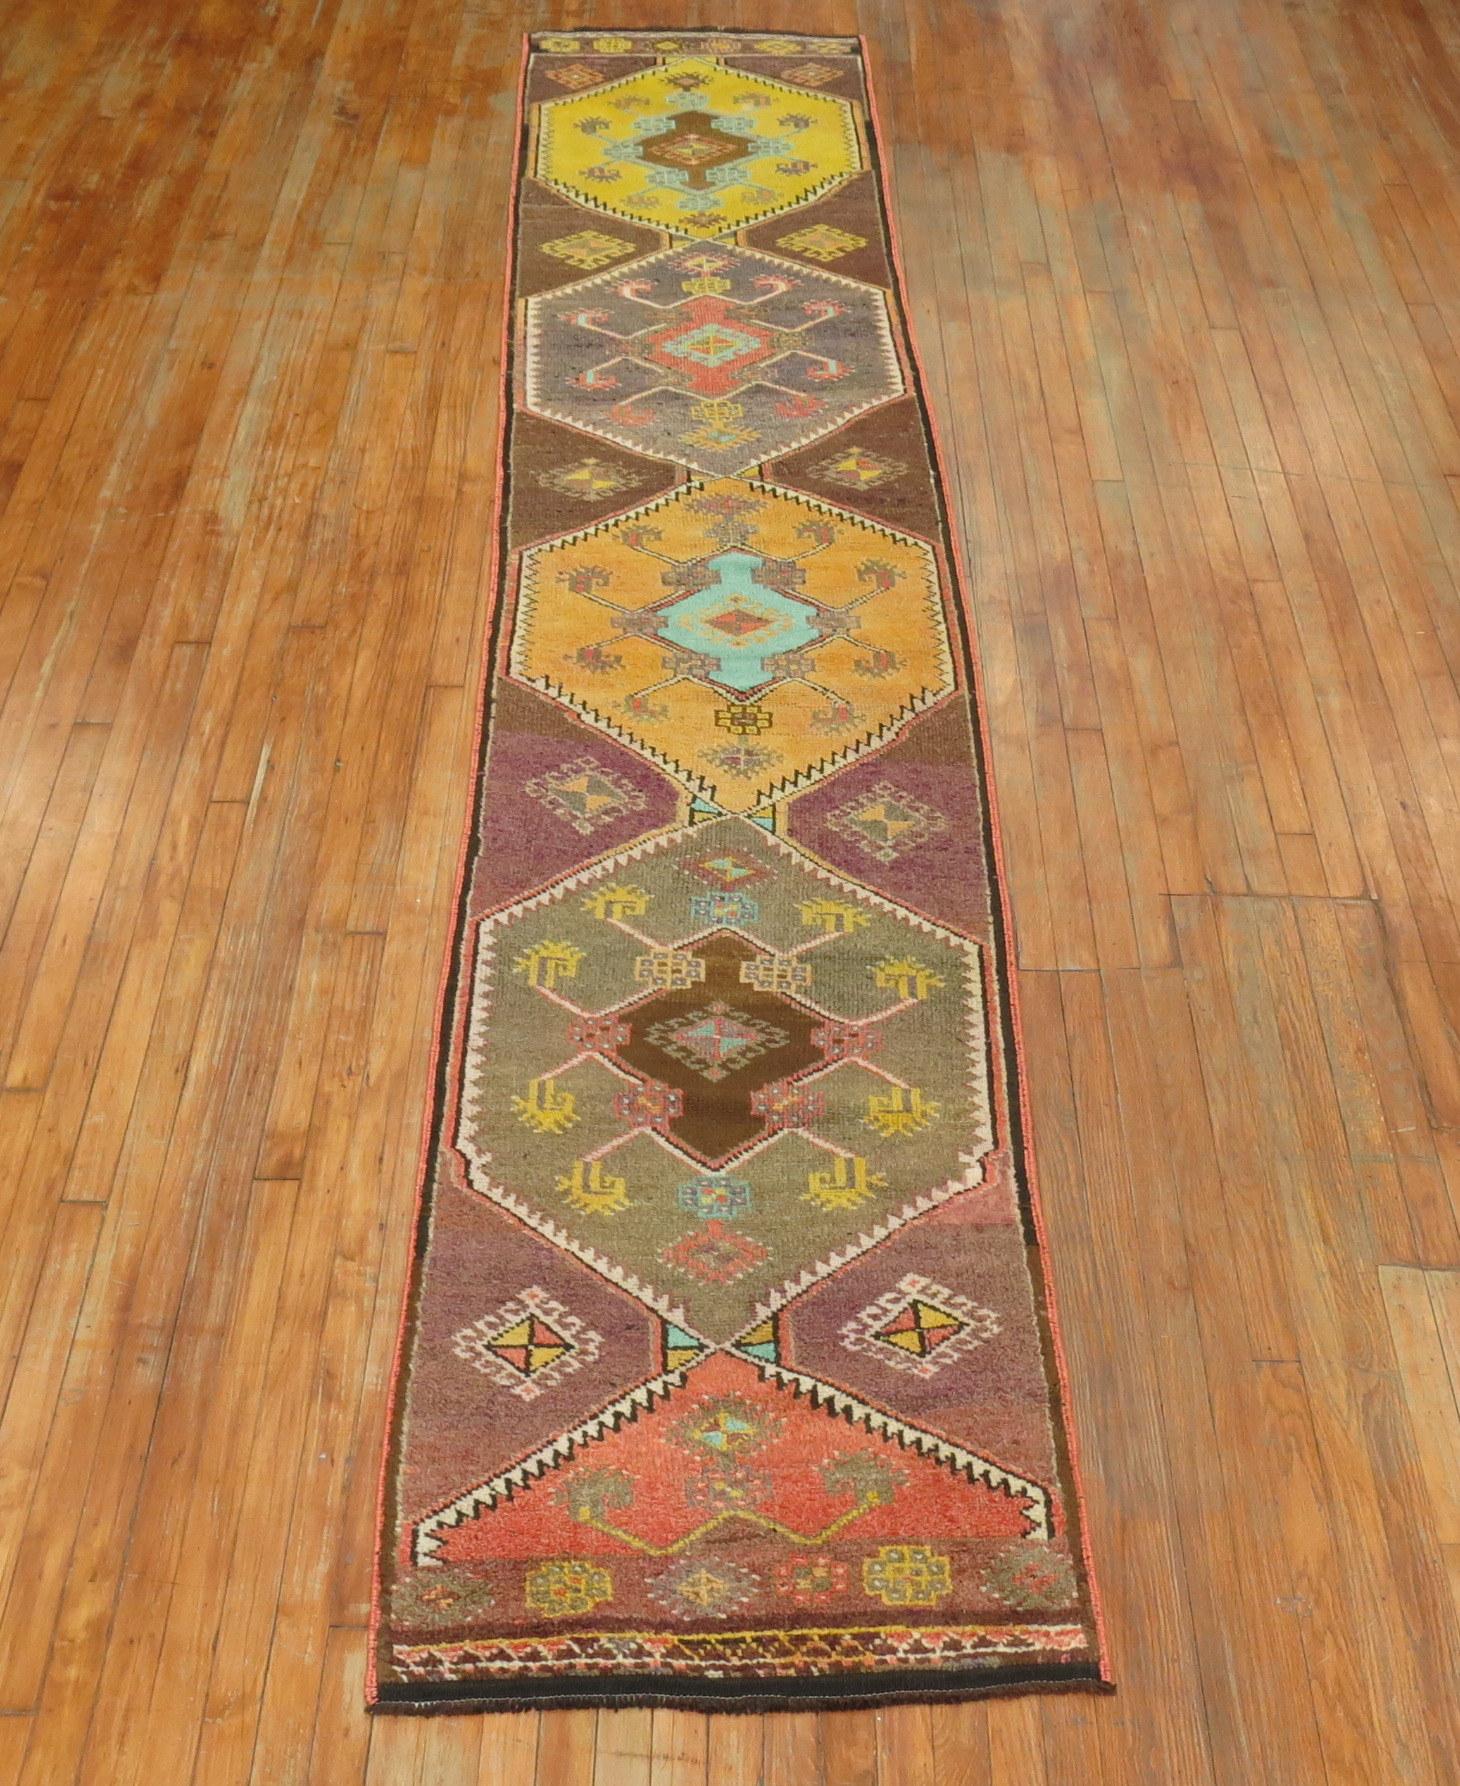 One of a kind, mid-20th century handwoven Turkish village kars runner professionally washed and personally vetted. Ready for everyday use.